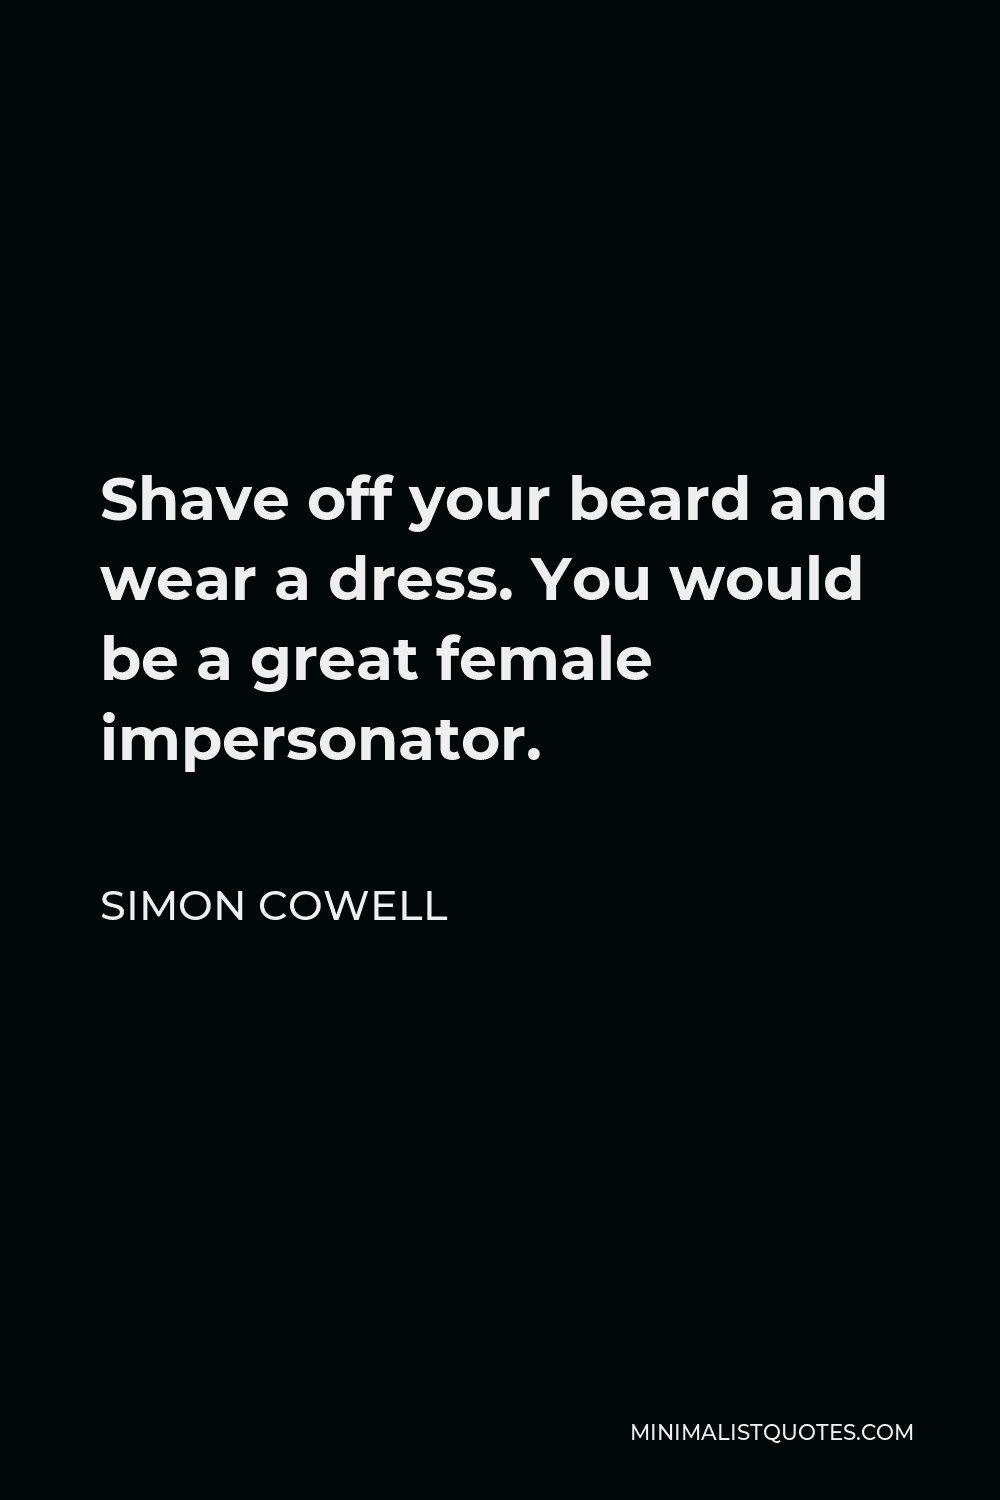 Simon Cowell Quote - Shave off your beard and wear a dress. You would be a great female impersonator.